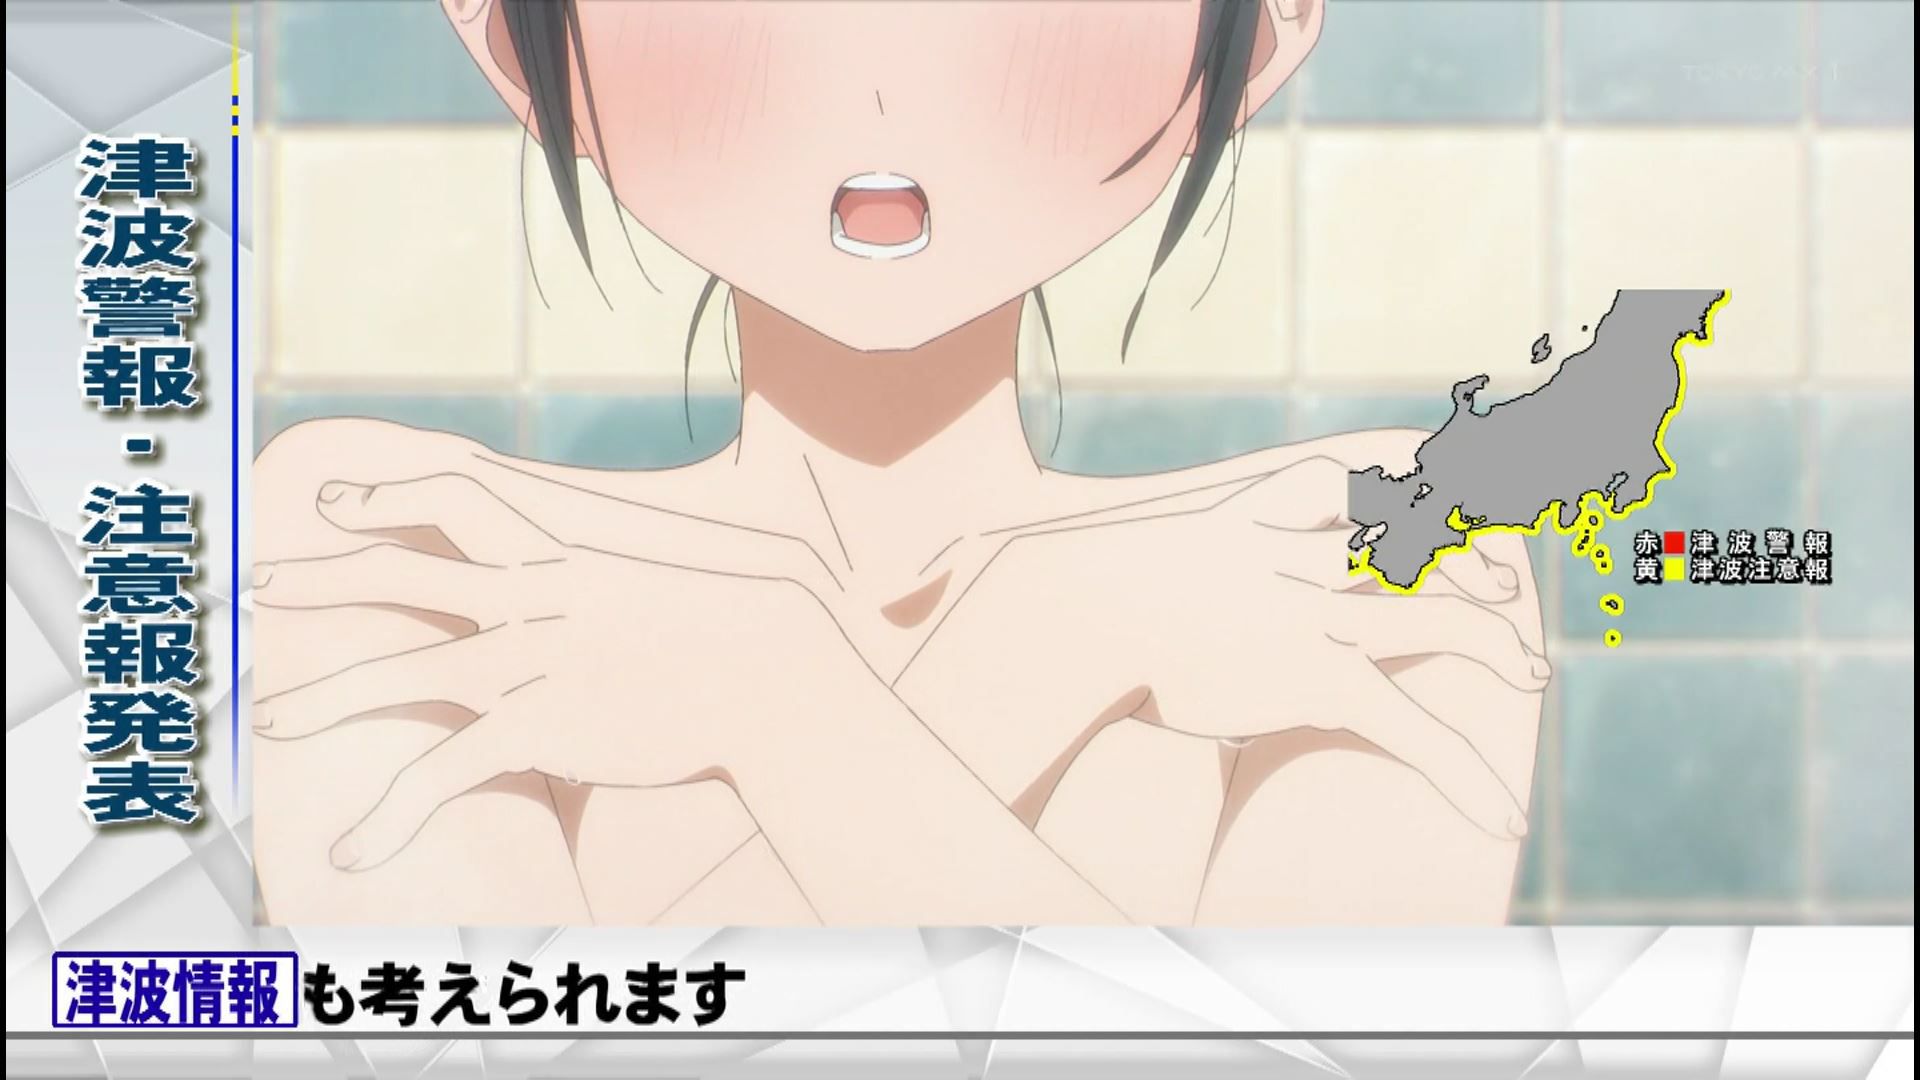 In the anime "Tomorrow-chan's Sailor Suit" episode 2, the girl's erotic bathing scene and the punchy scene 22